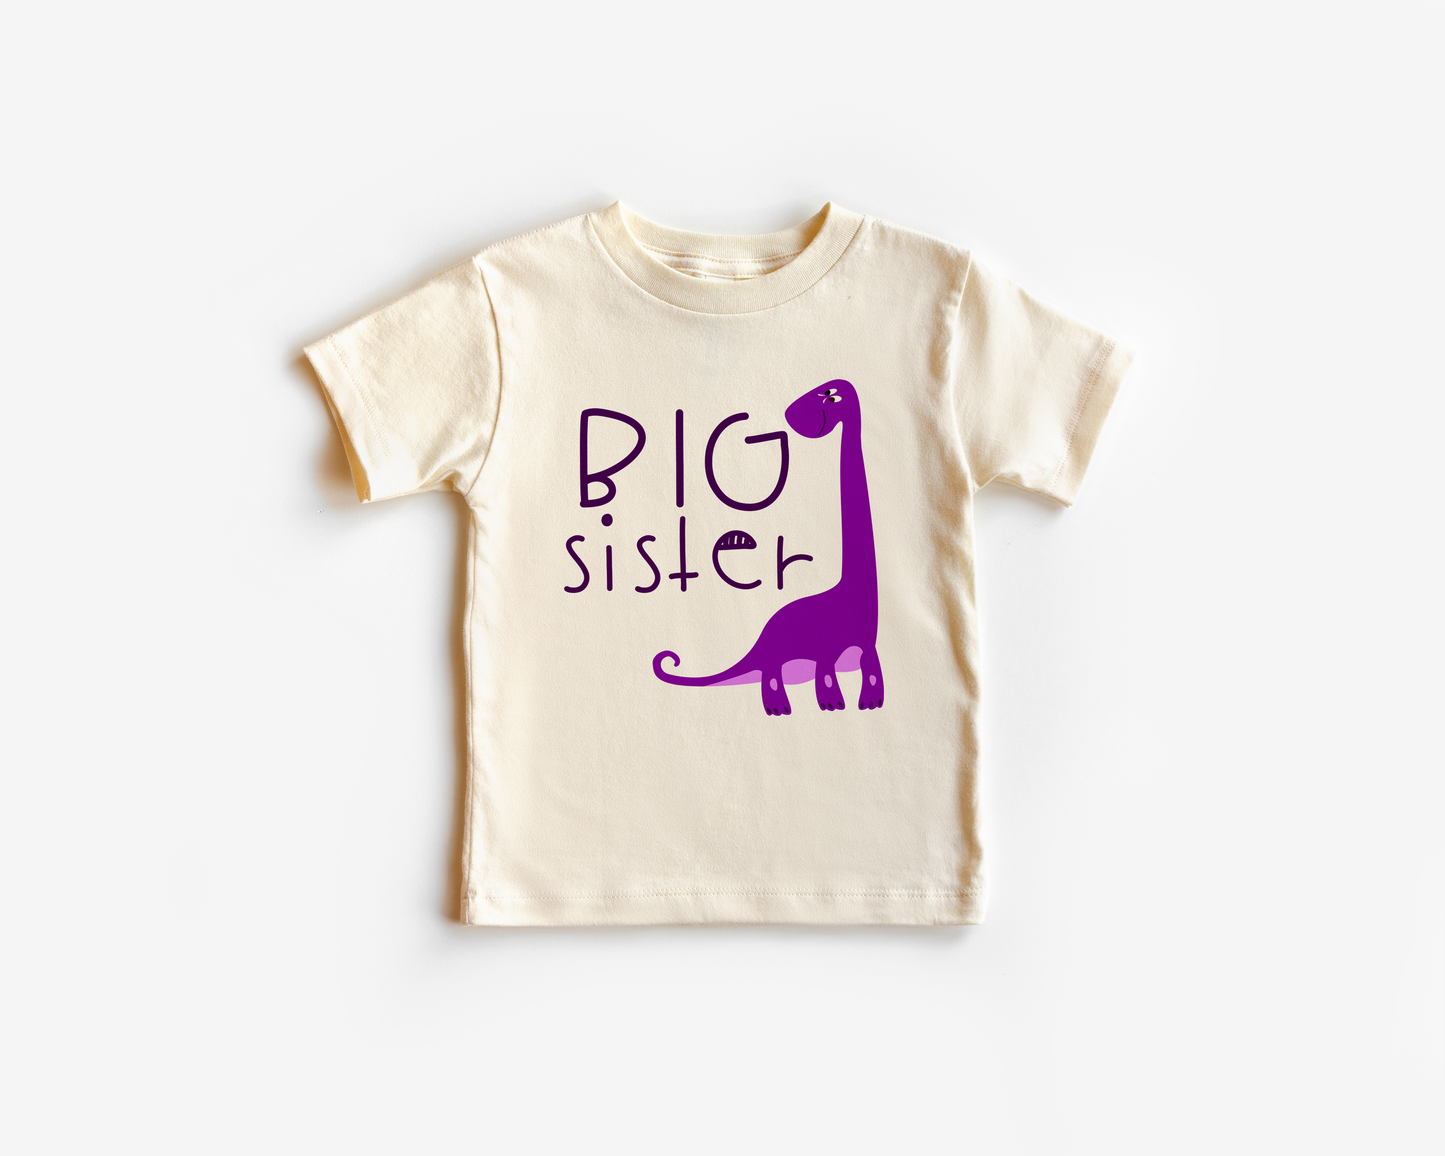 Big Sister with a purple dinosaur printed on Natural Color t shirt